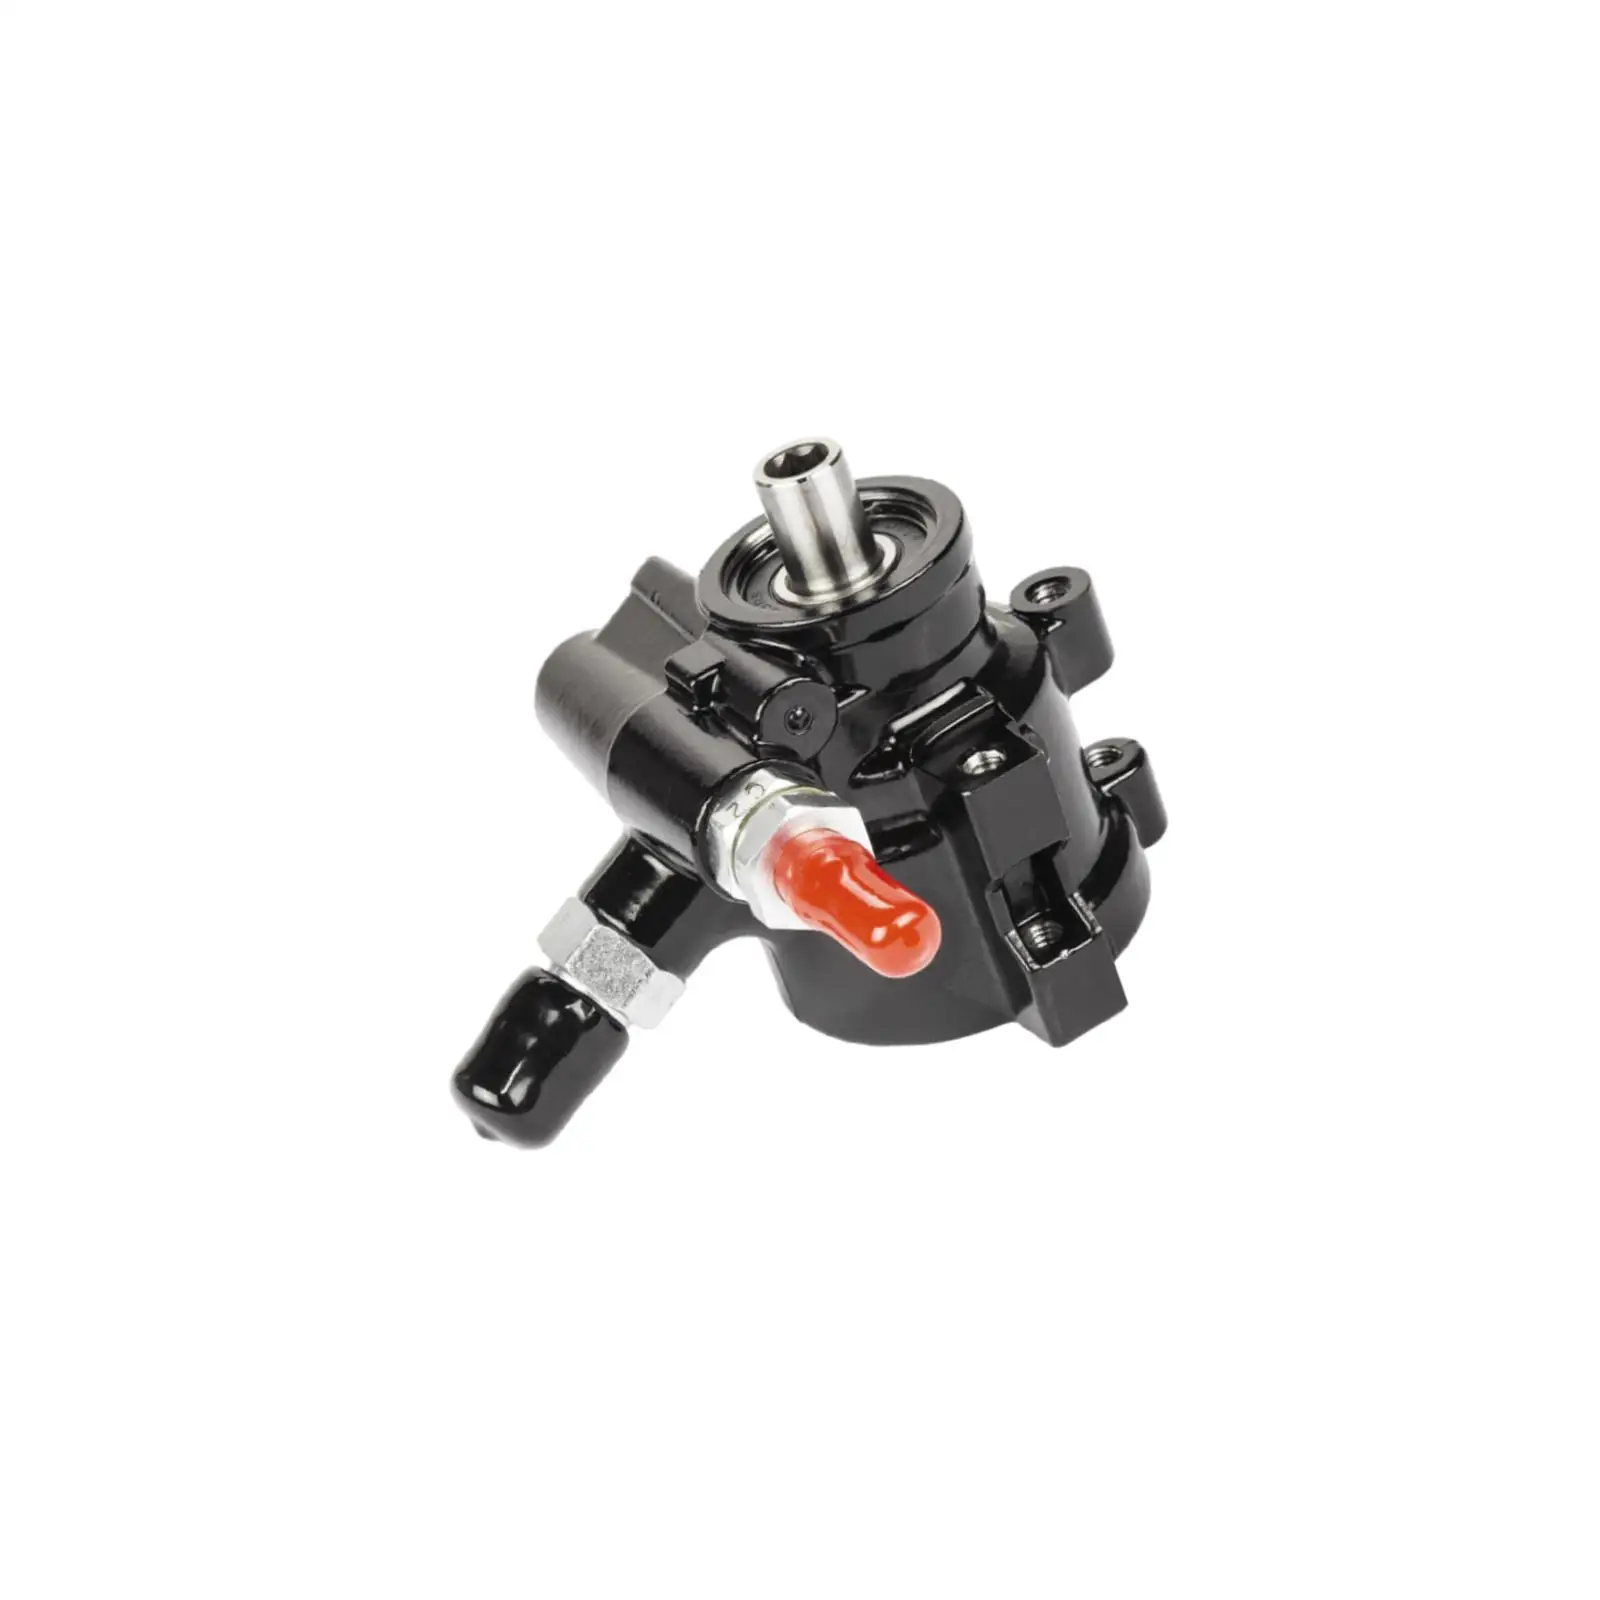 Power Steering Pump Power Assist Pump Replace for Saginaw TC Type 2 Performance Sturdy Easy Installation Durable